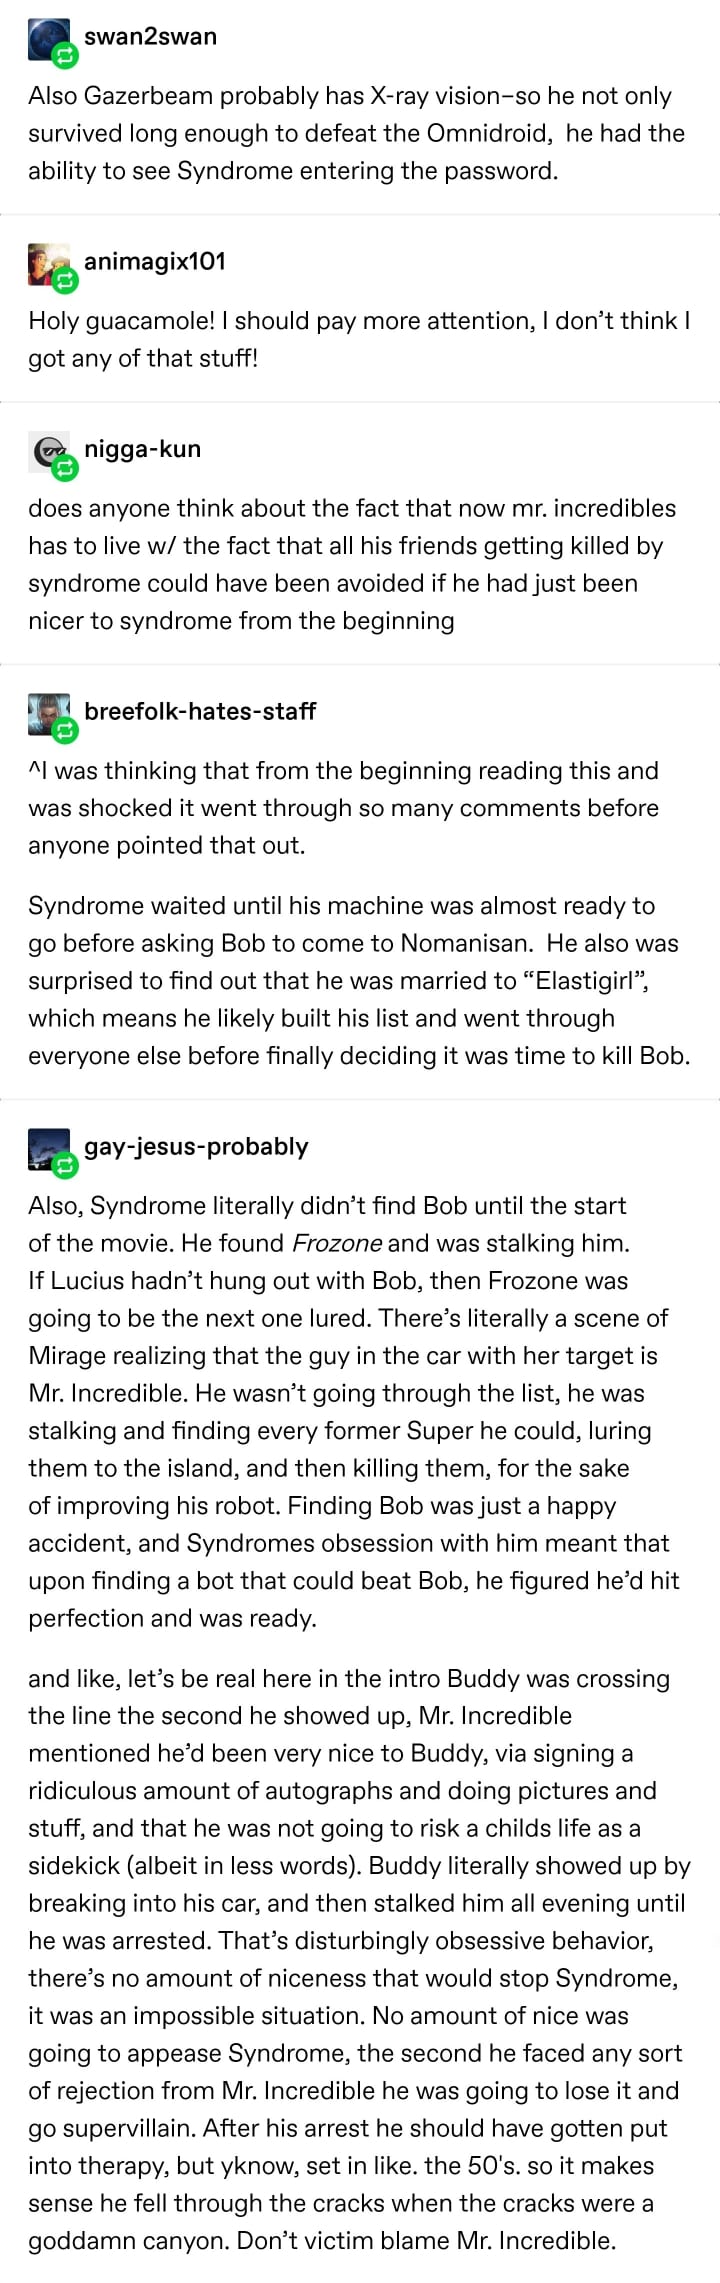 People Love This Deep Analysis Thread Of ‘The Incredibles’